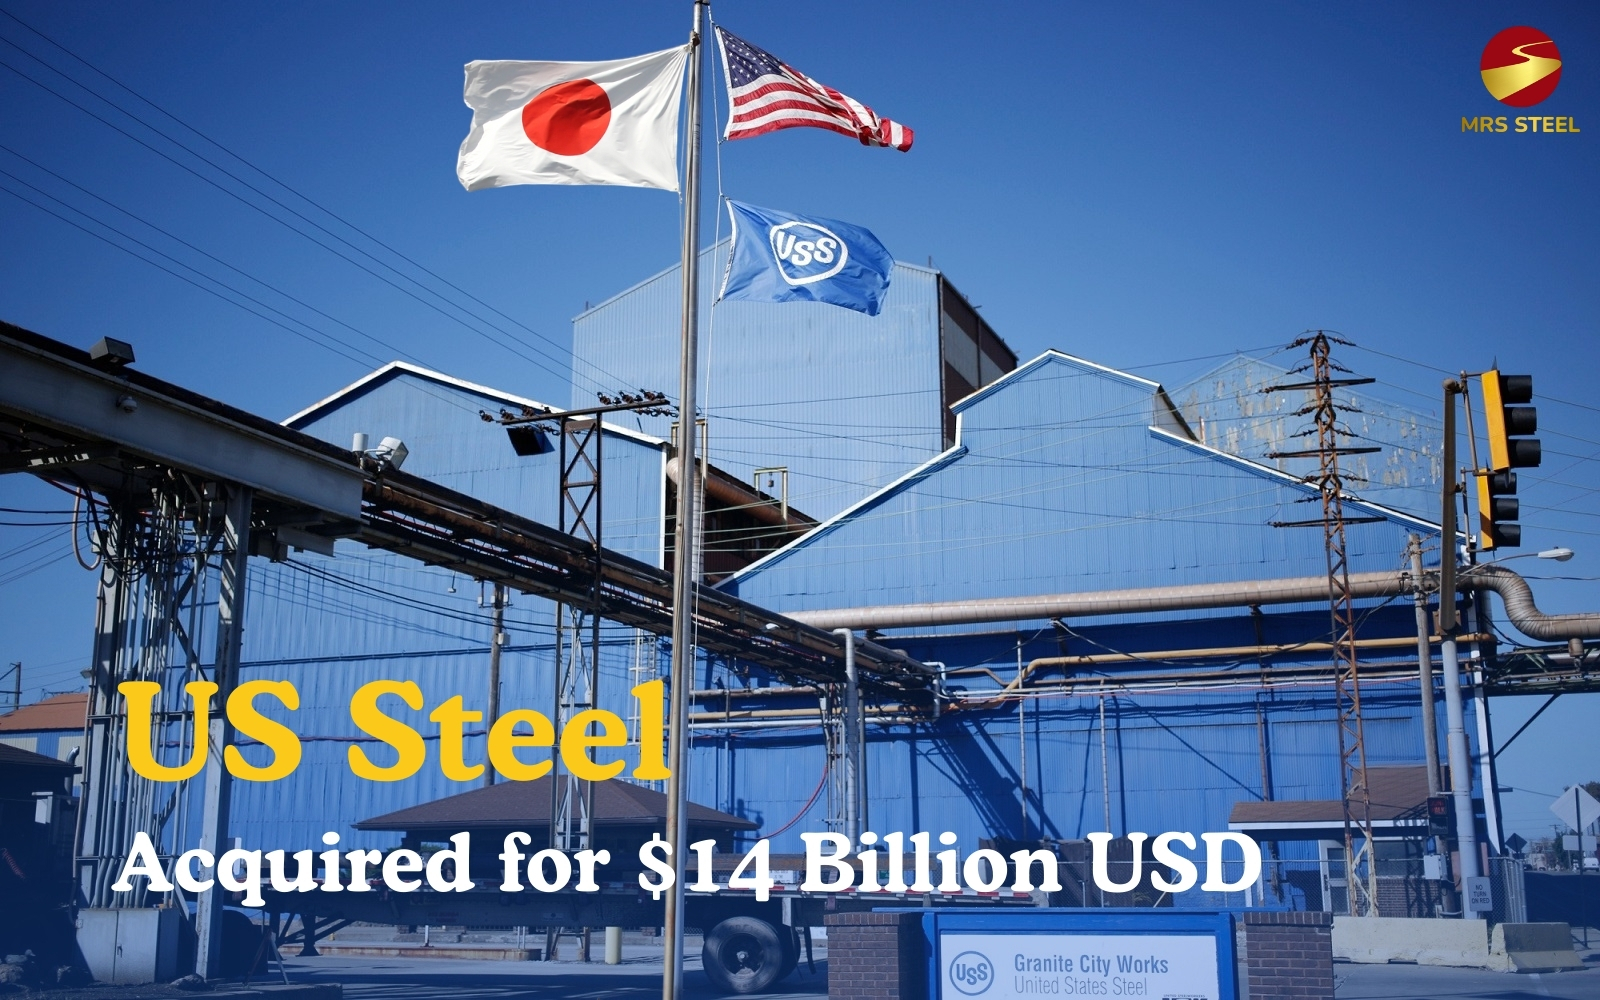 US Steel Acquired for $14 Billion USD